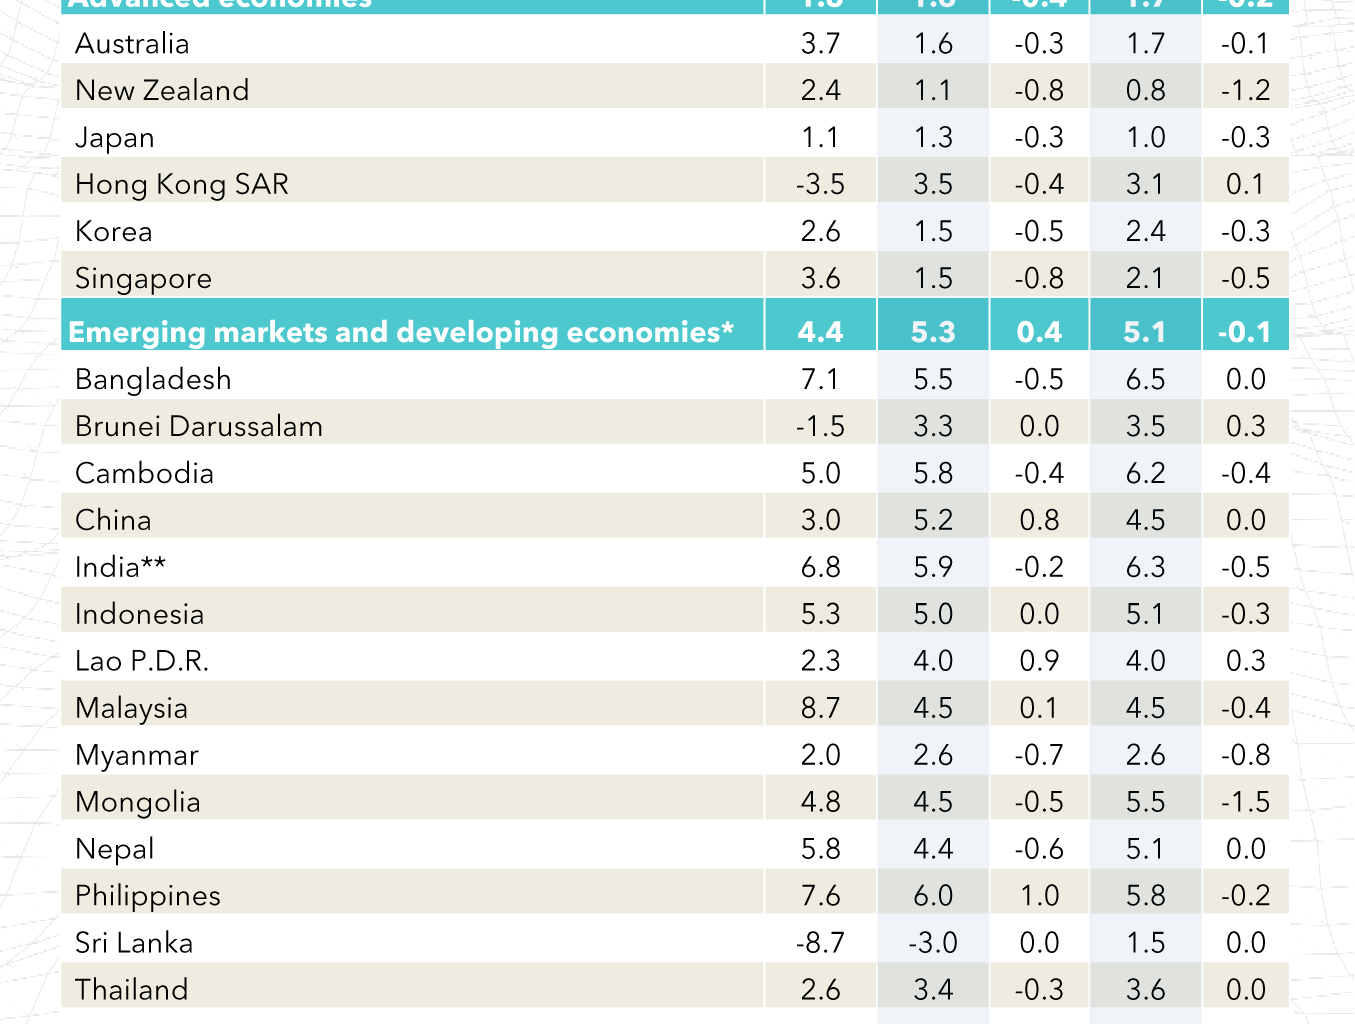 IMF forecasts a 3.4% GDP growth for Thailand in 2023